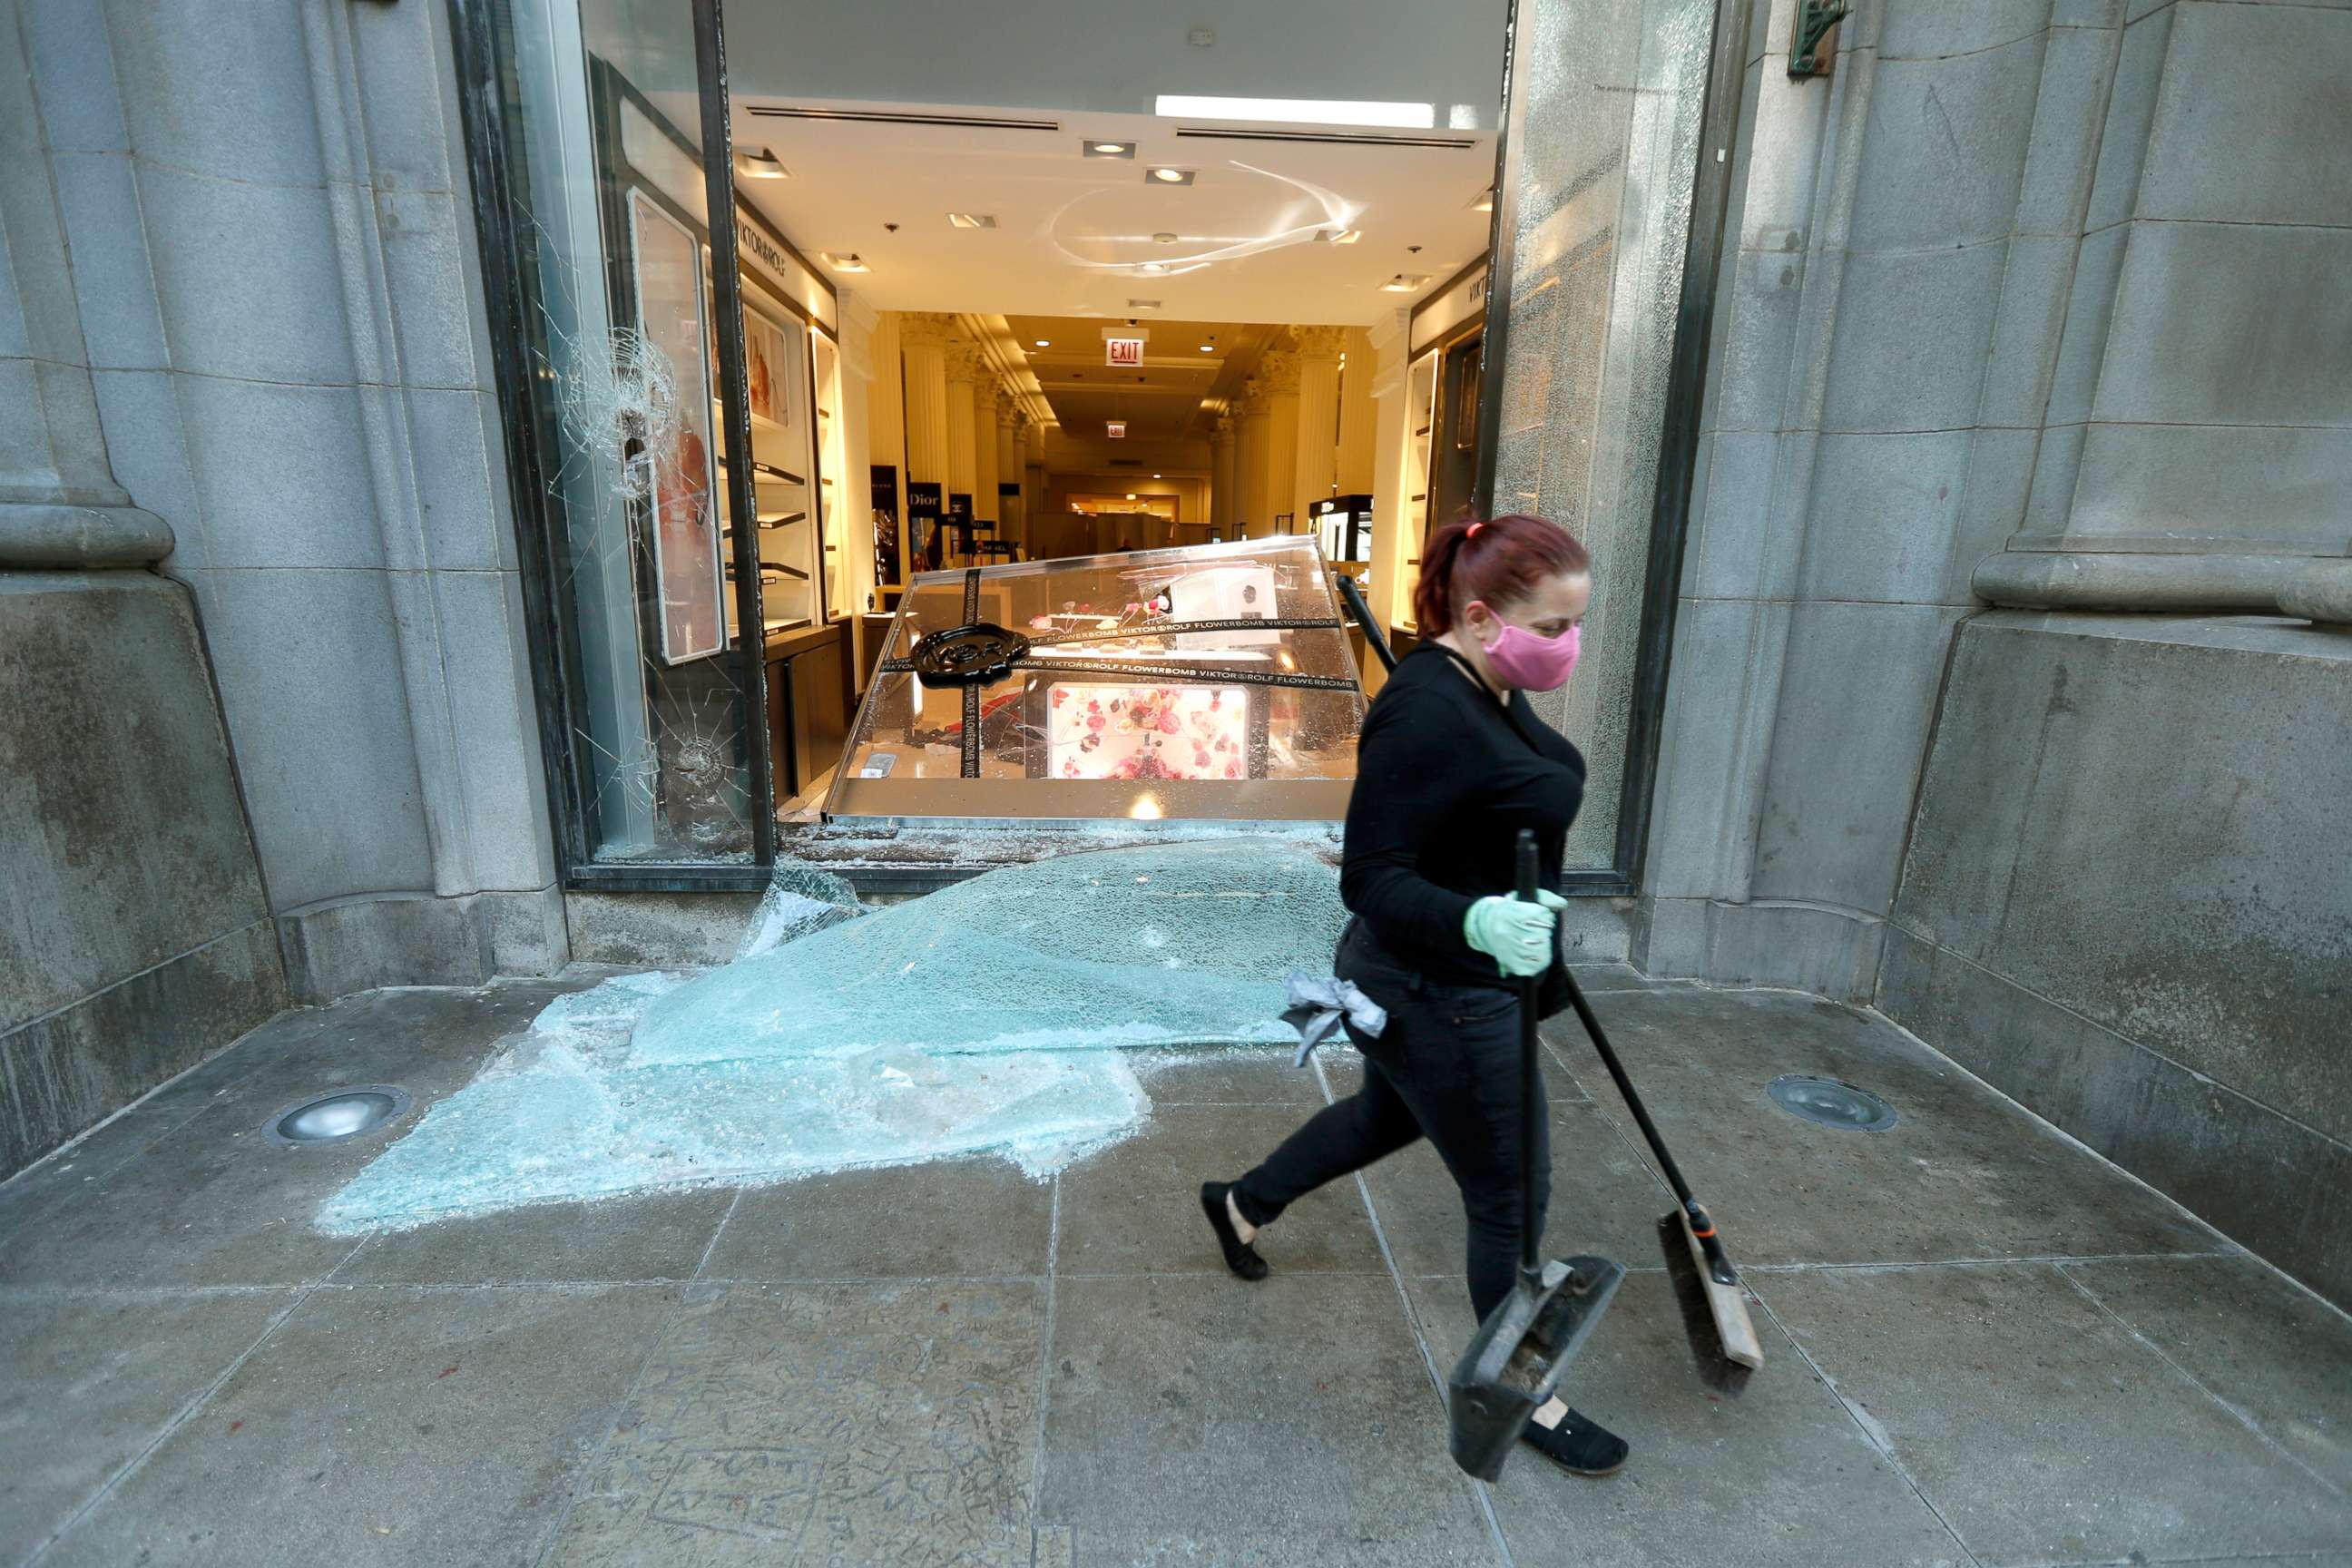 PHOTO: A volunteer worker walks past a shattered display window early, May 31, 2020, at the downtown Macy's store in Chicago, after a night of unrest and protests over the death of George Floyd, a black man who was in police custody in Minneapolis.